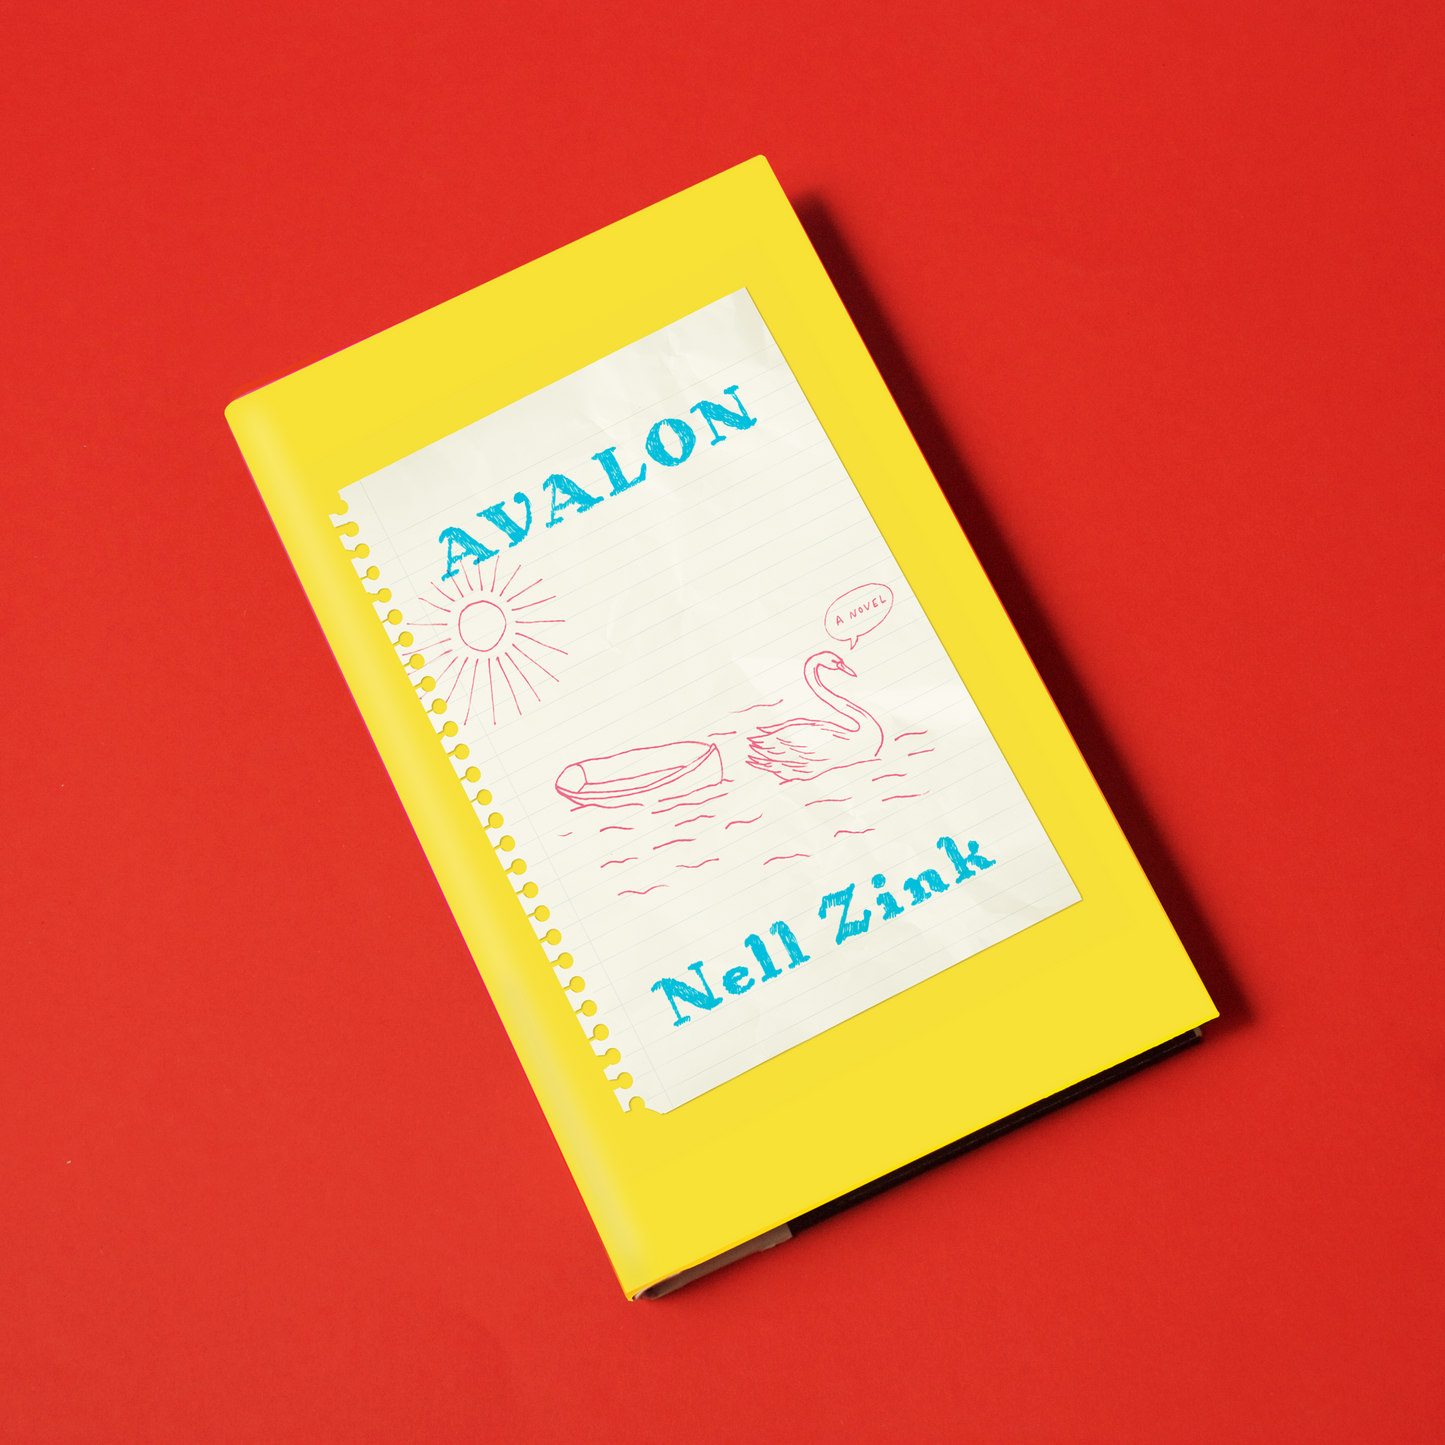 Avalon, by Nell Zink